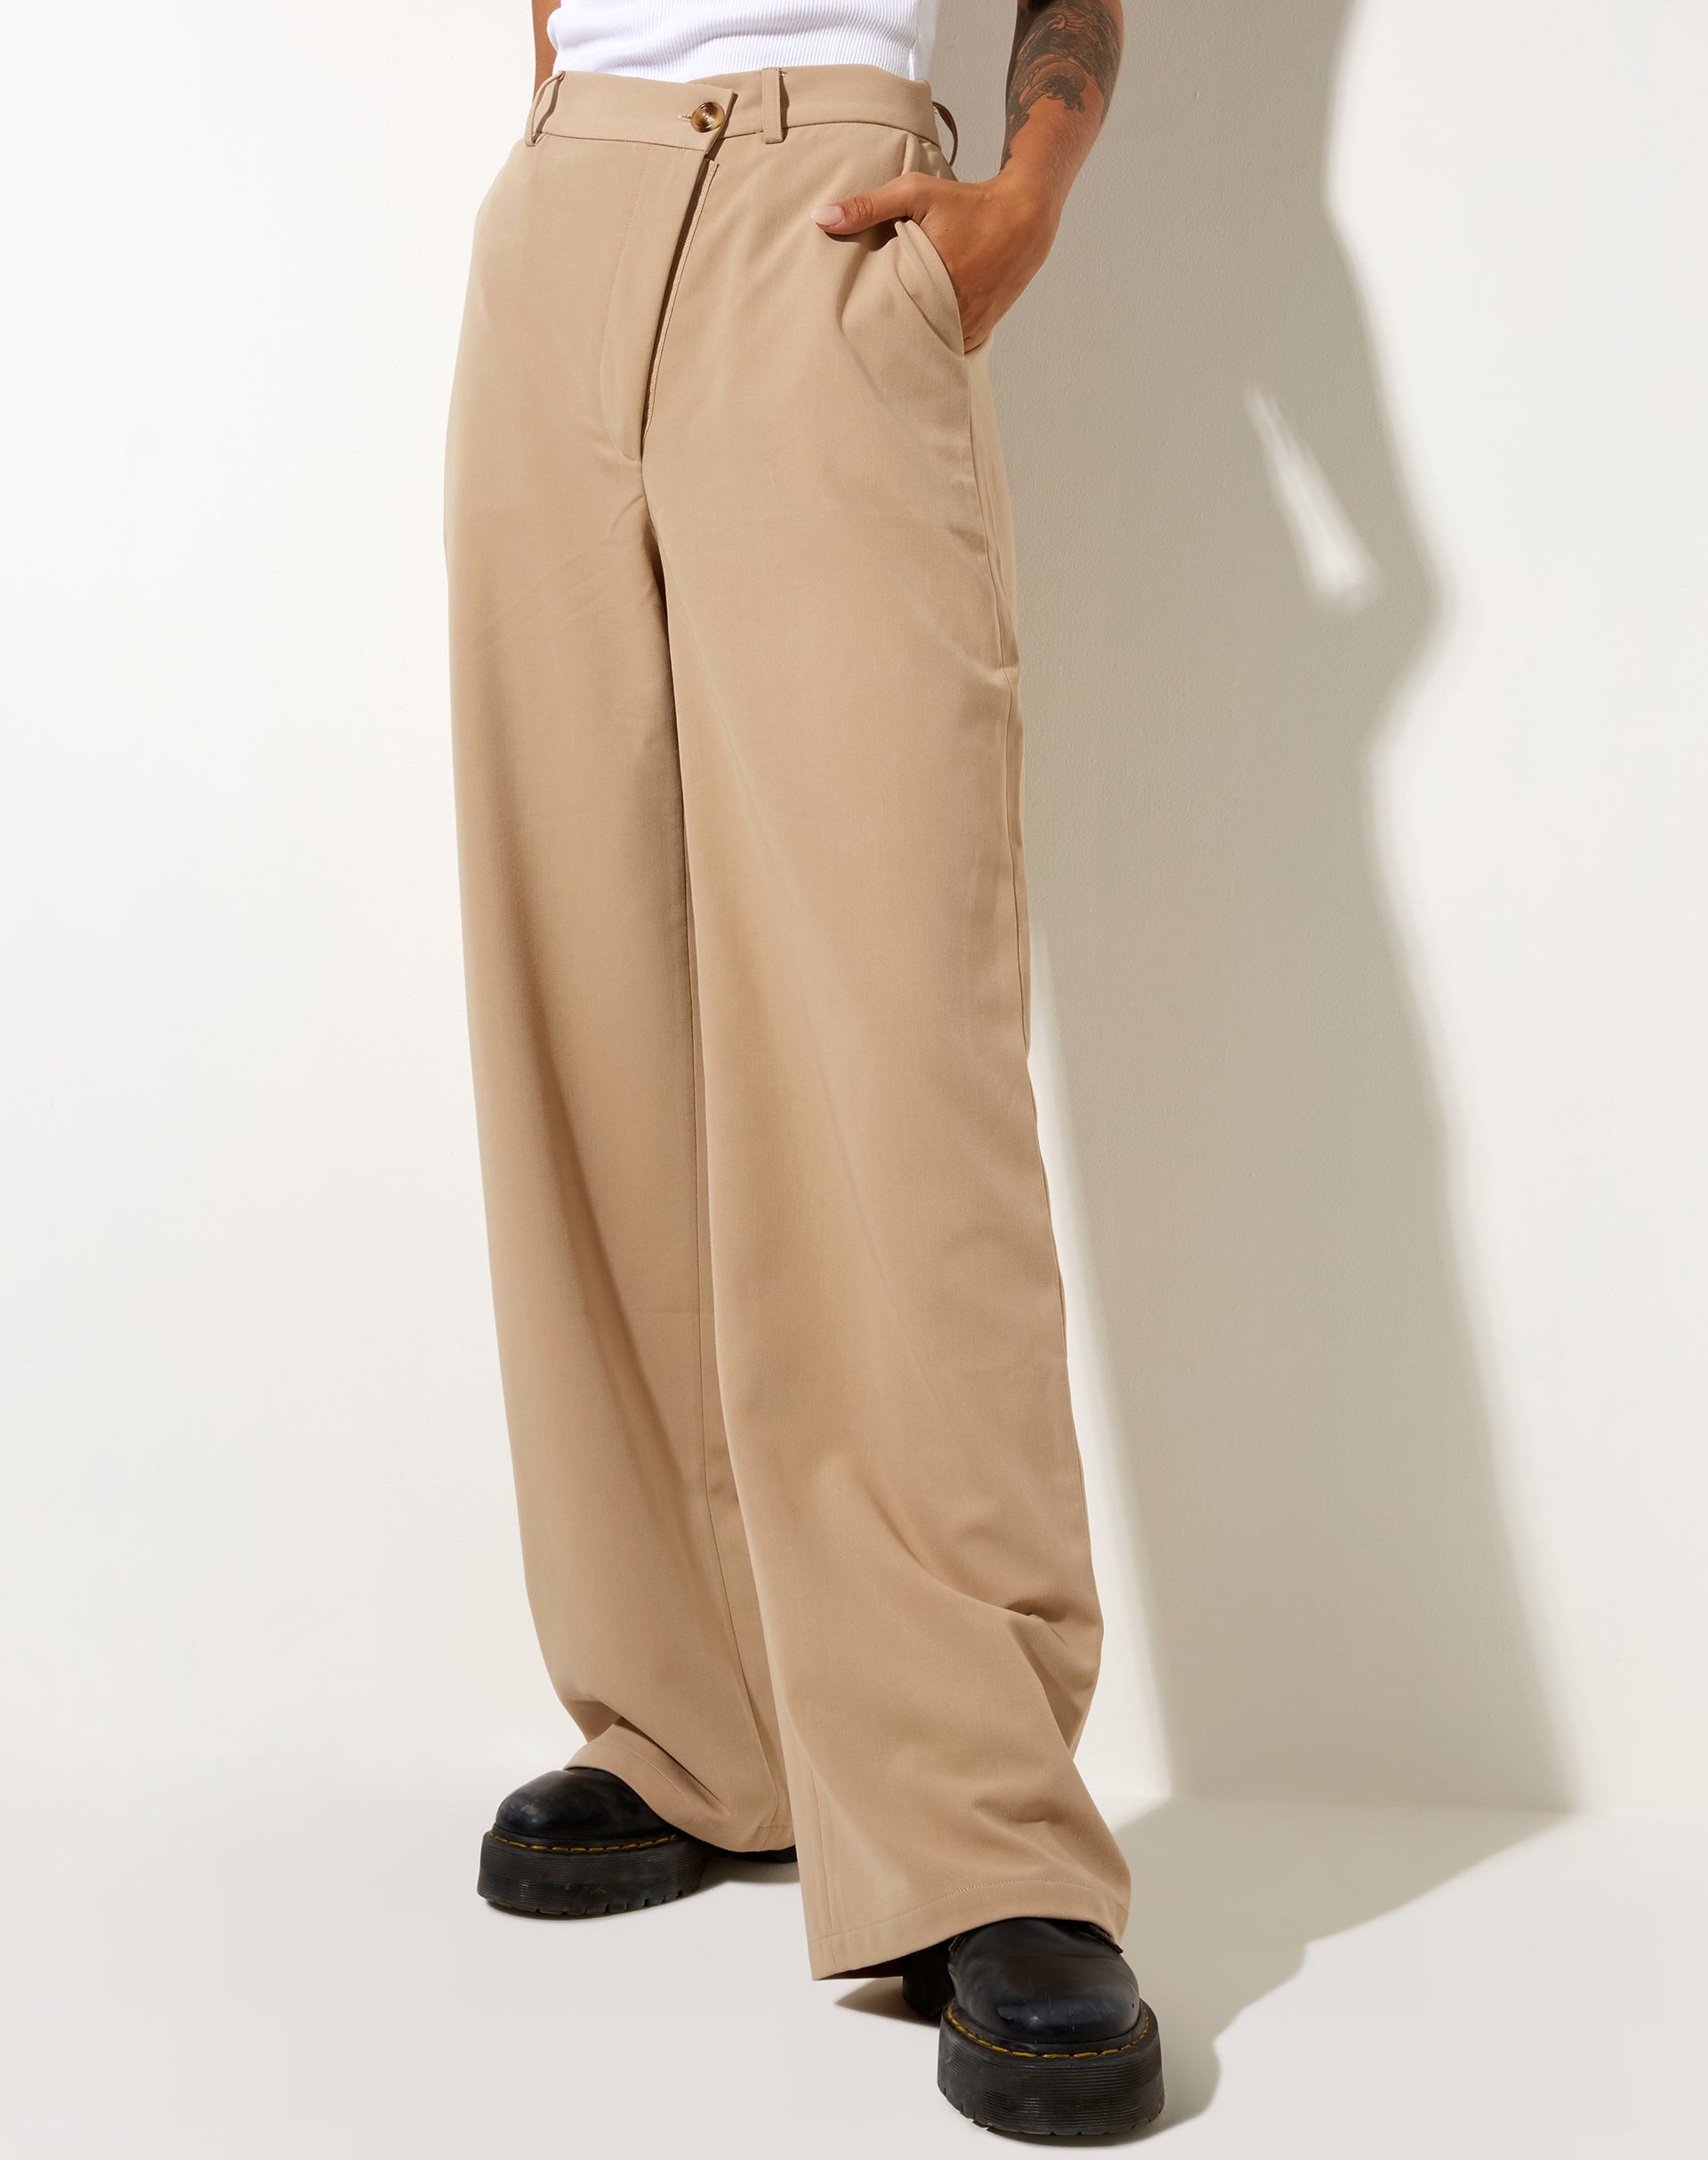 Image of Corby Trouser in Tailoring Tan